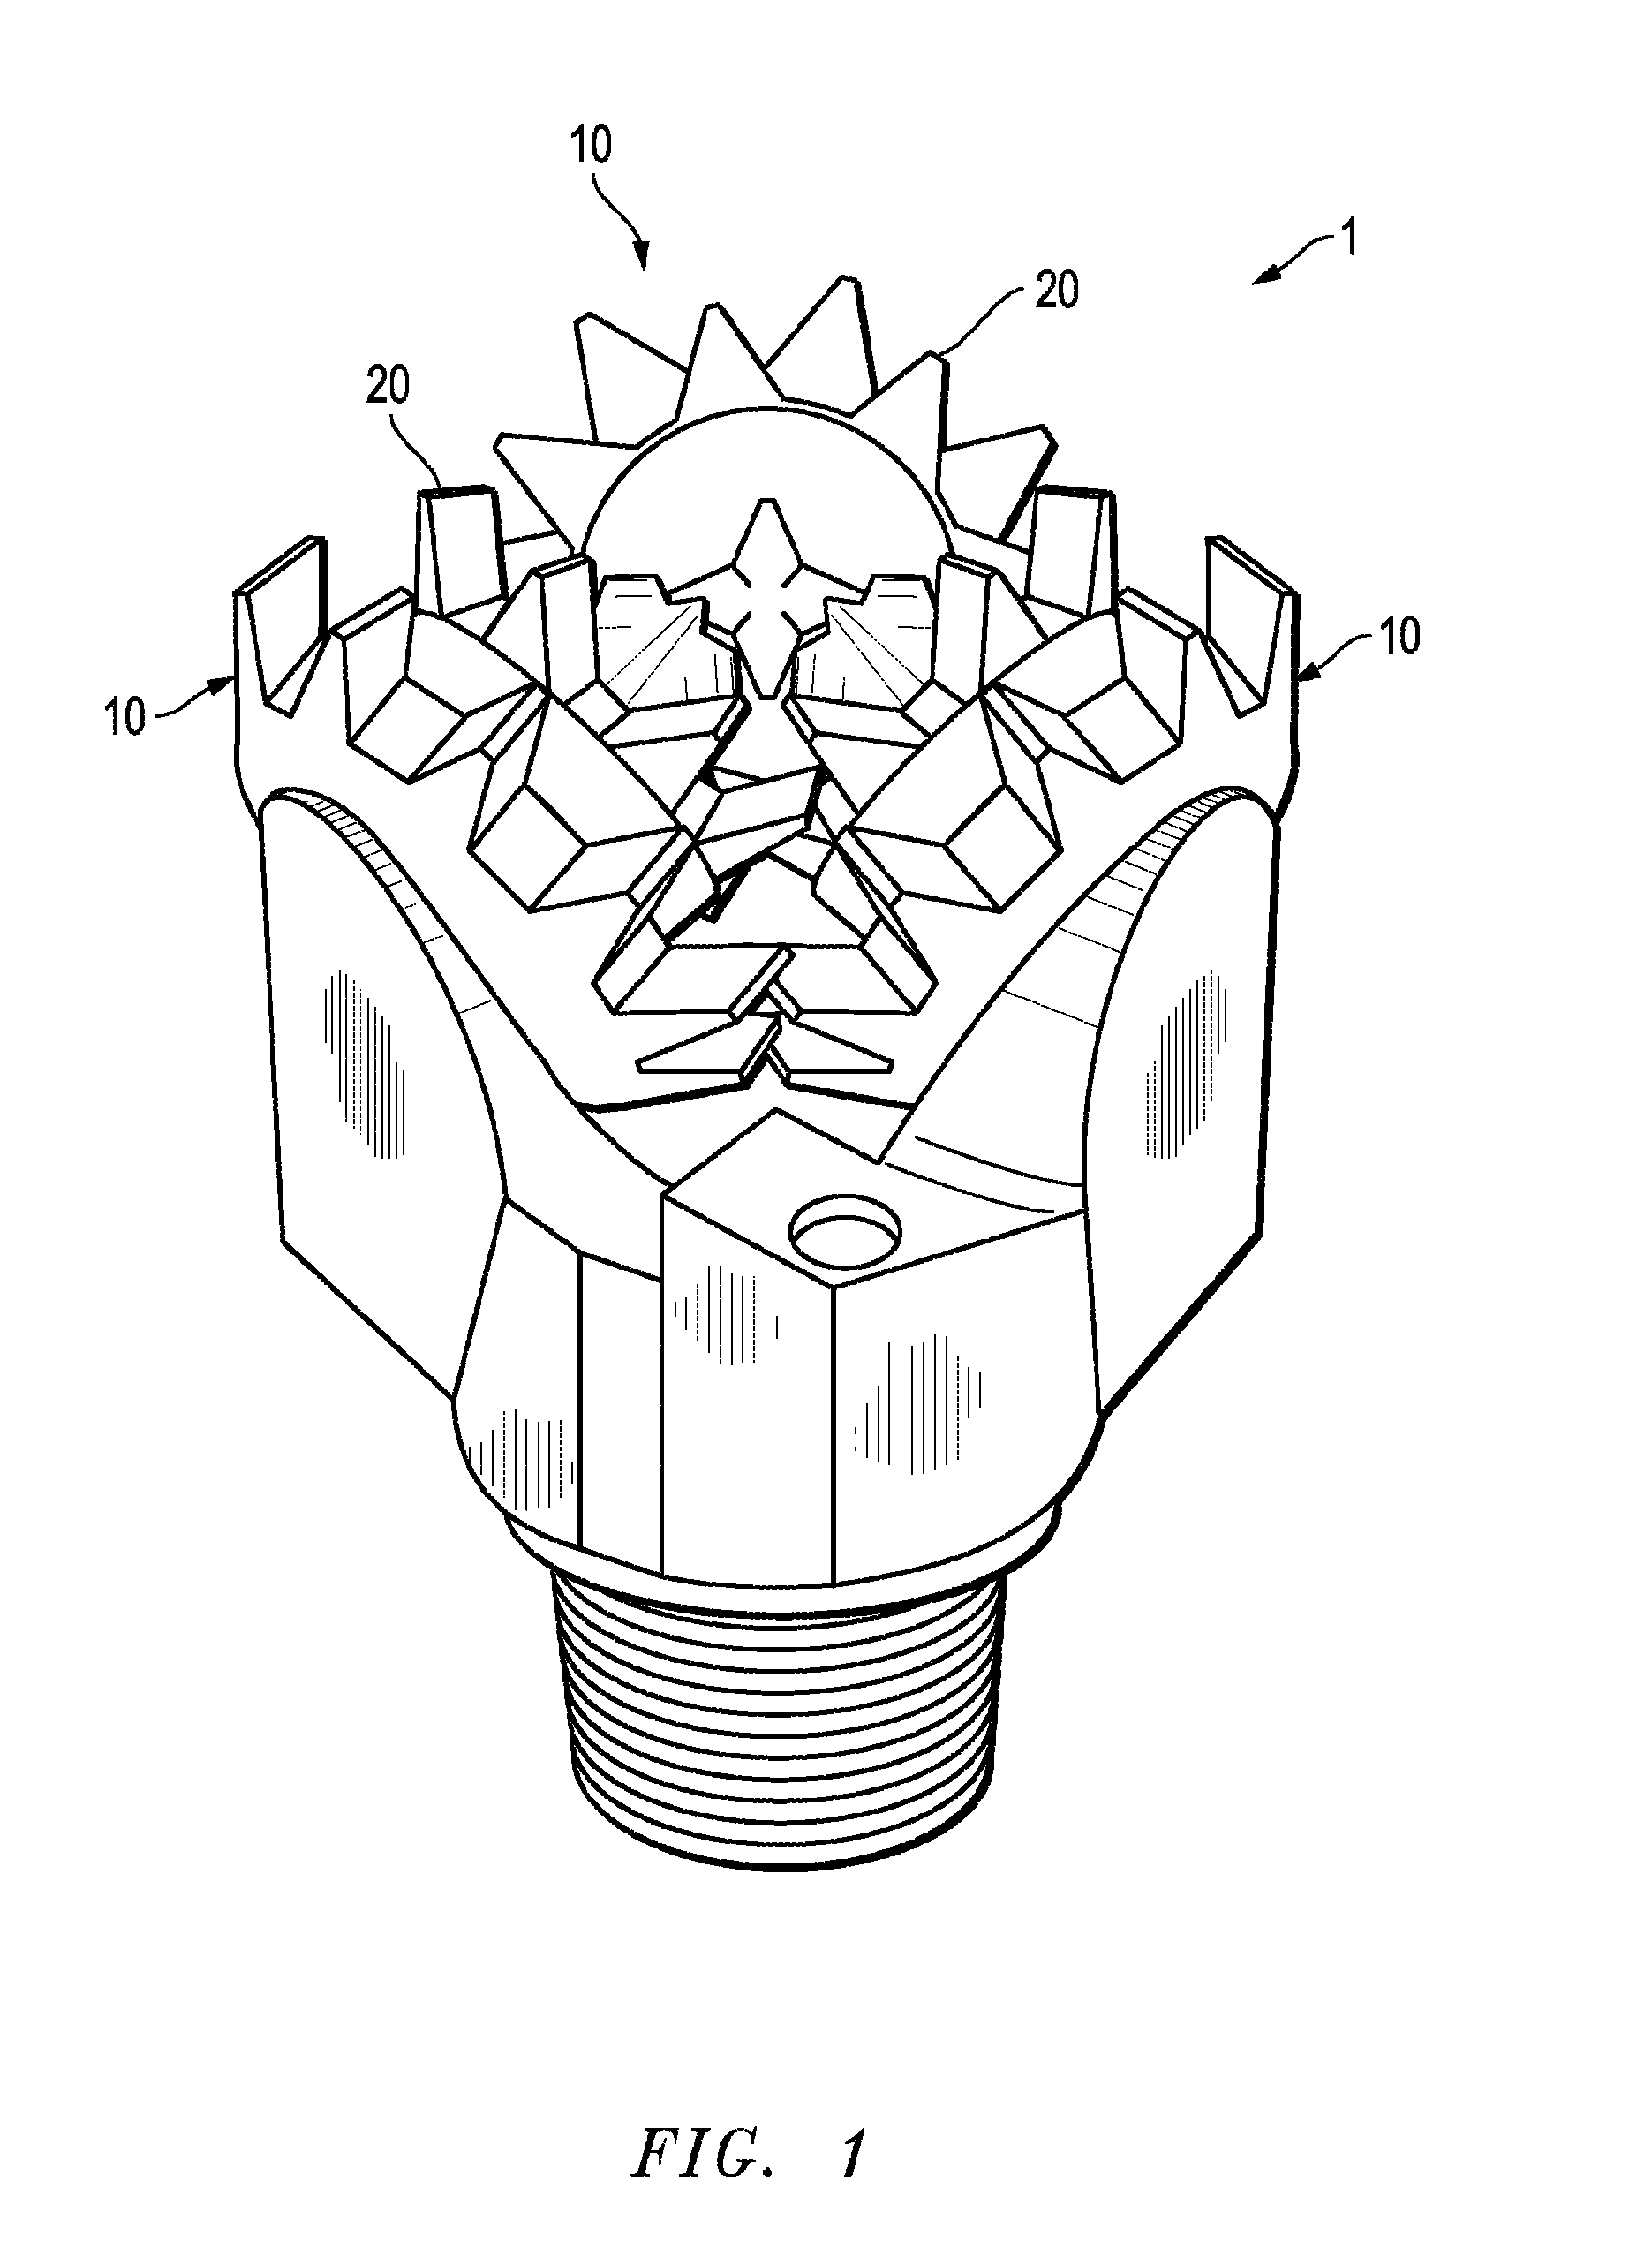 Method and apparatus for the automated application of hardfacing material to rolling cutters of earth-boring drill bits